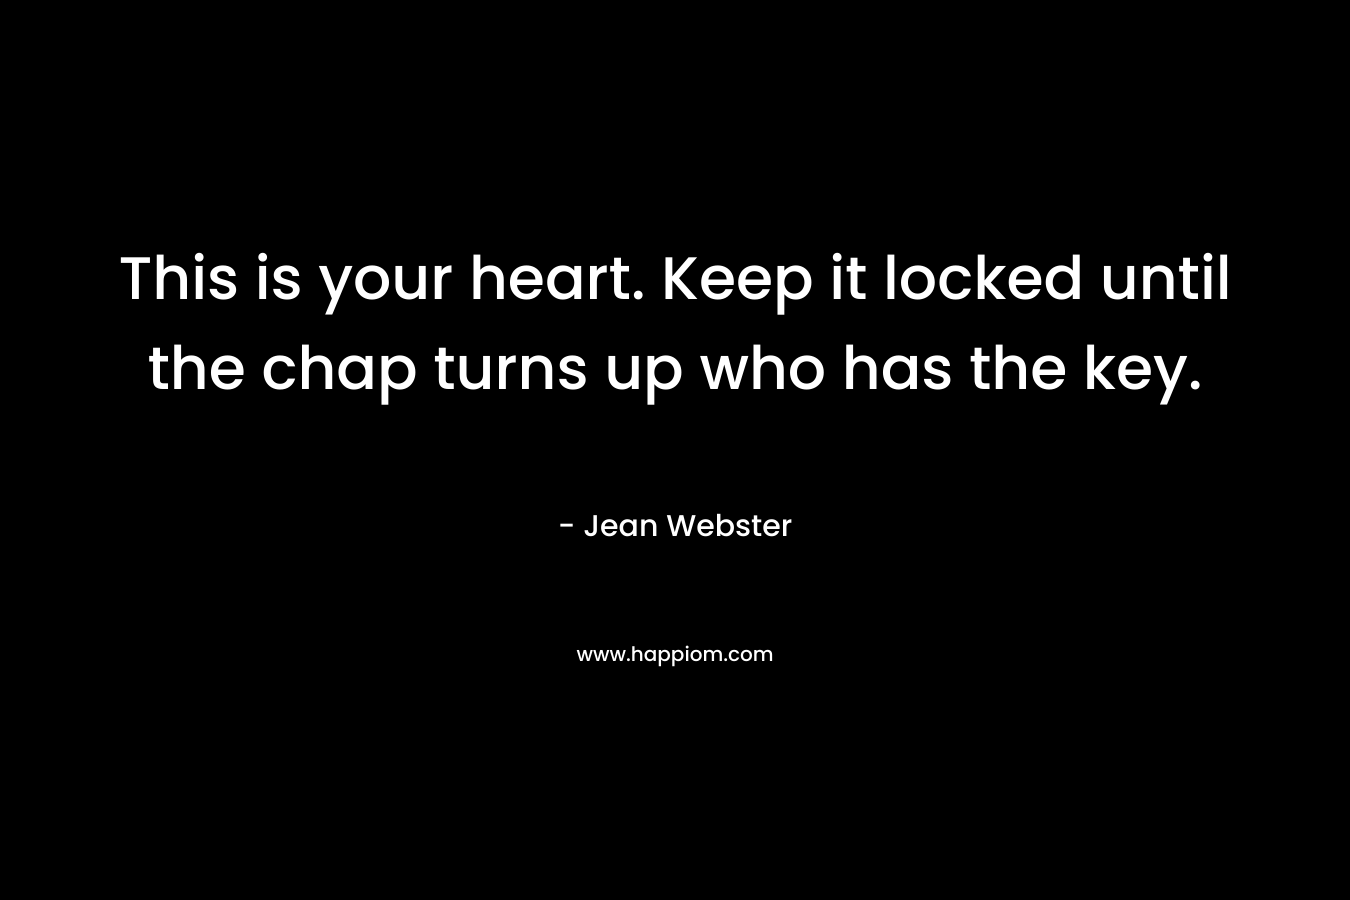 This is your heart. Keep it locked until the chap turns up who has the key.